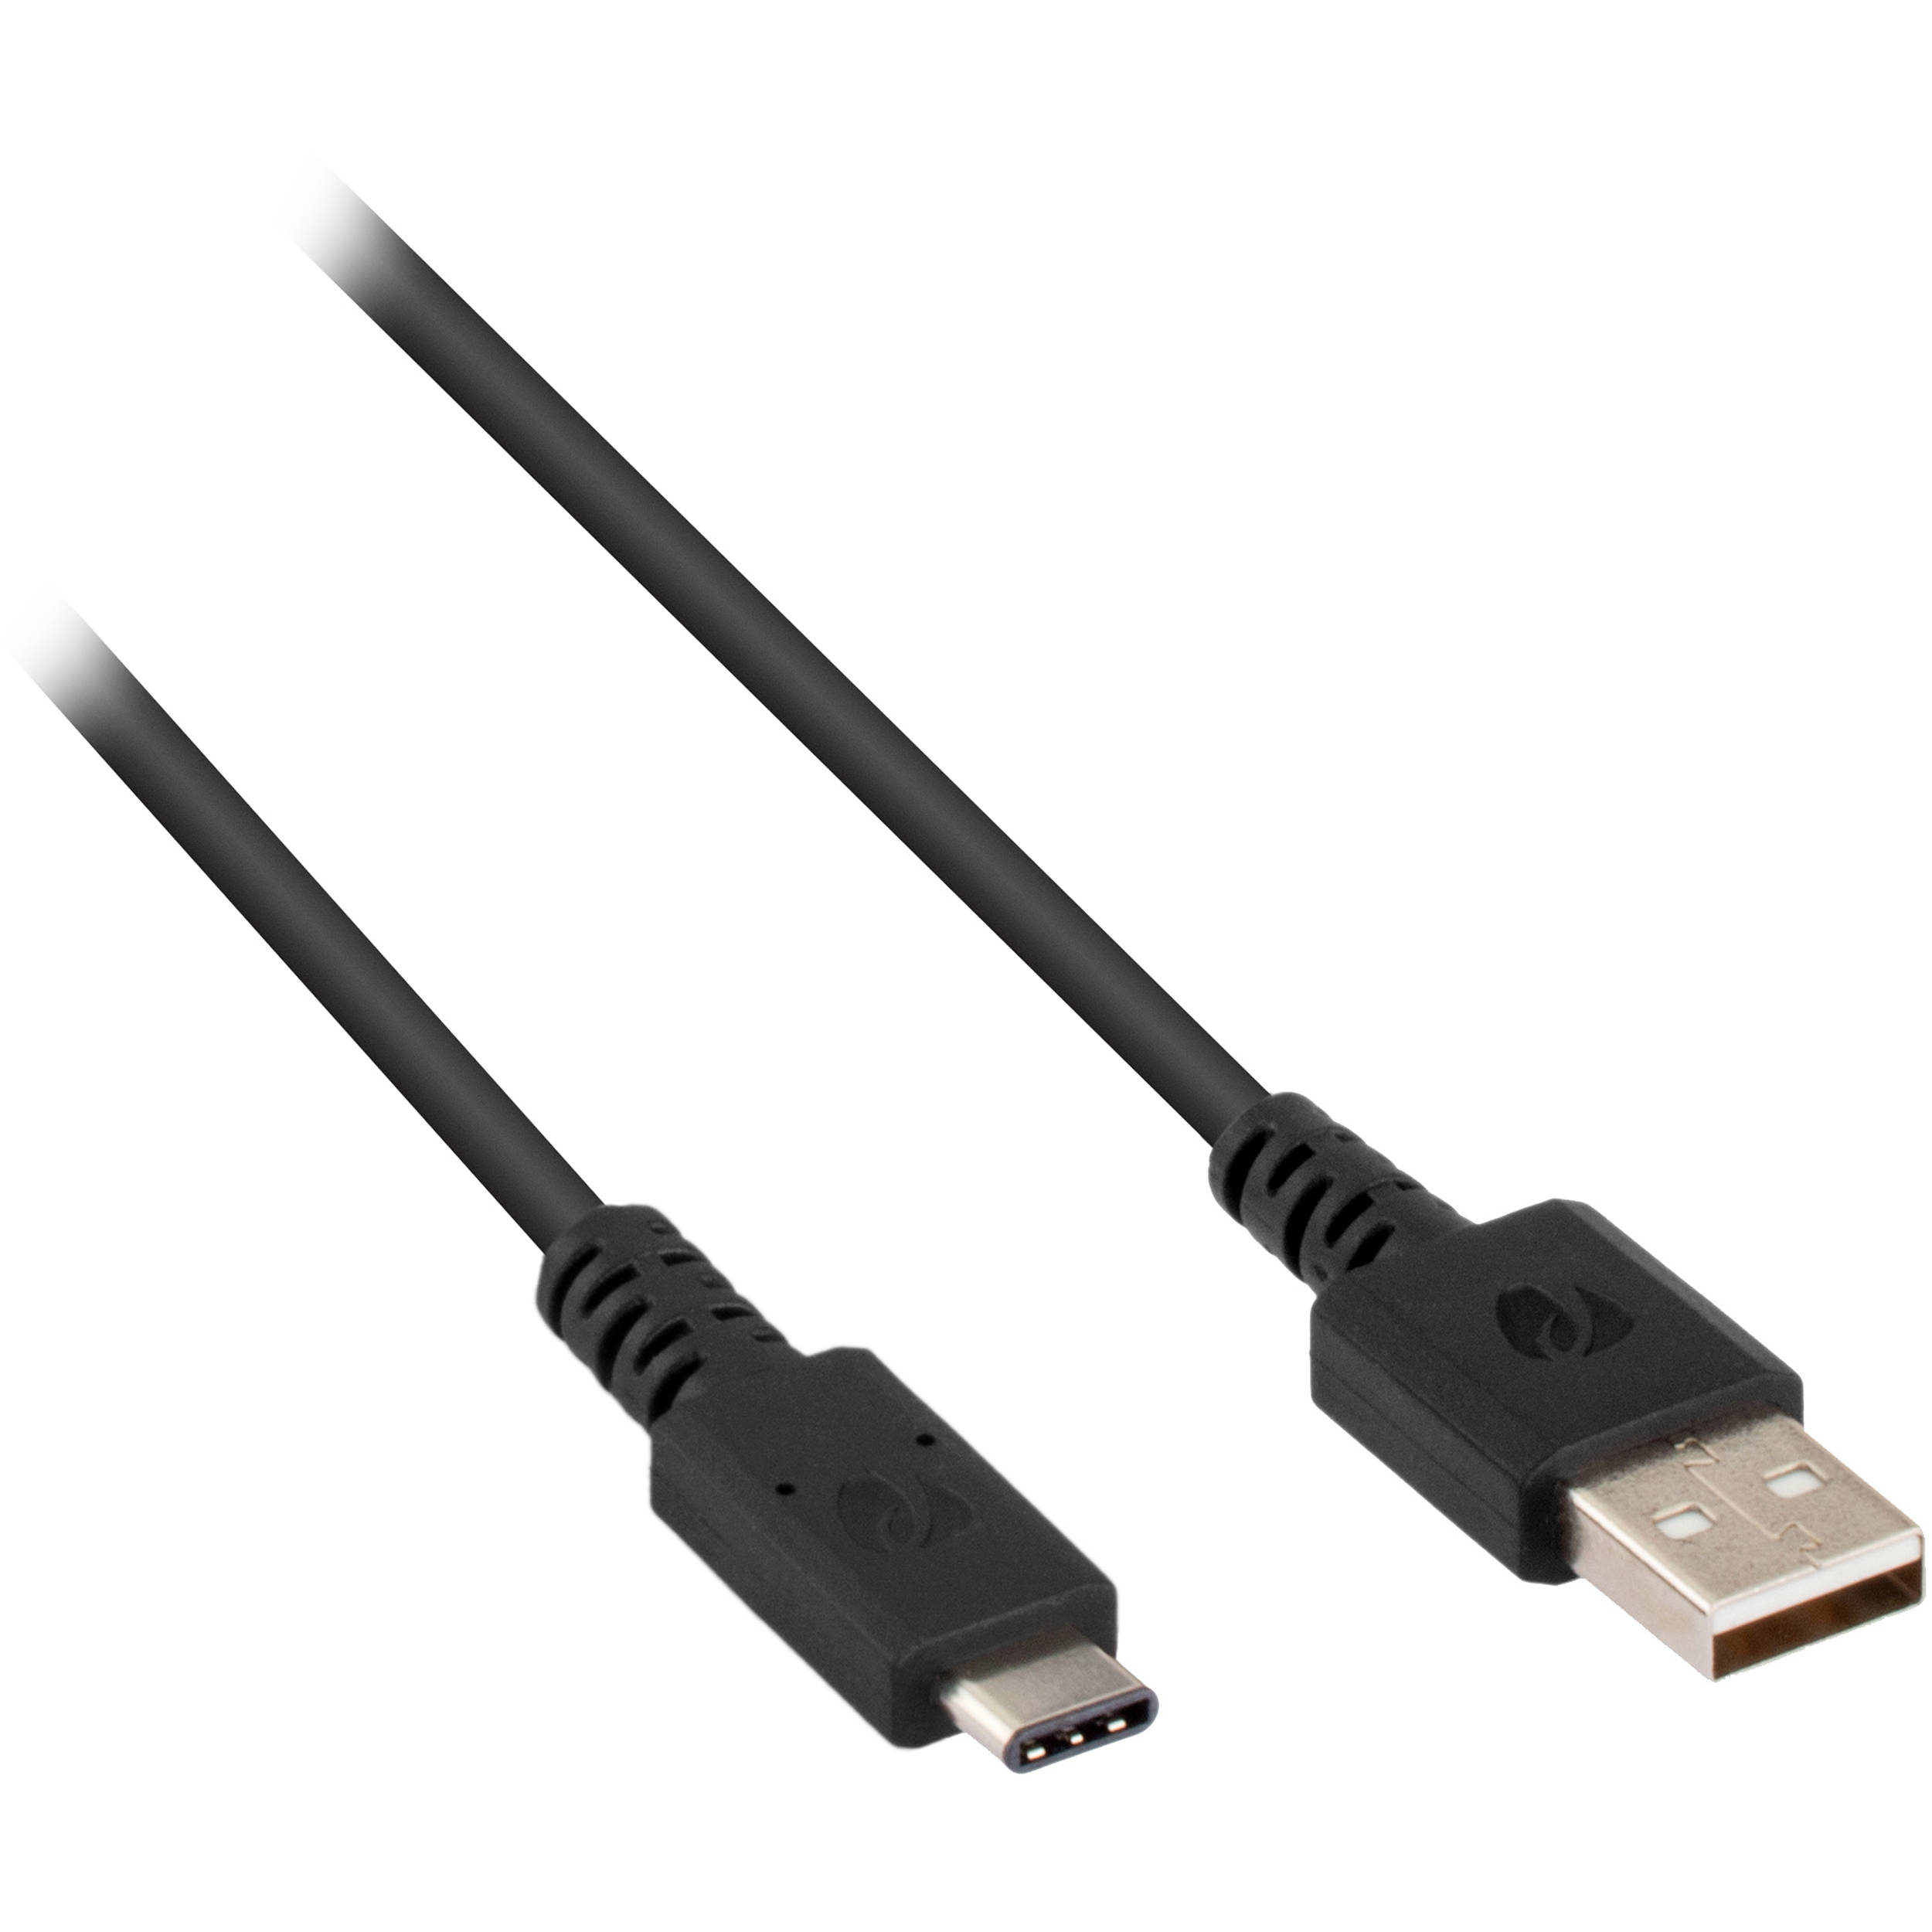 Pearstone USB 2.0 Type-C to USB Type-A 